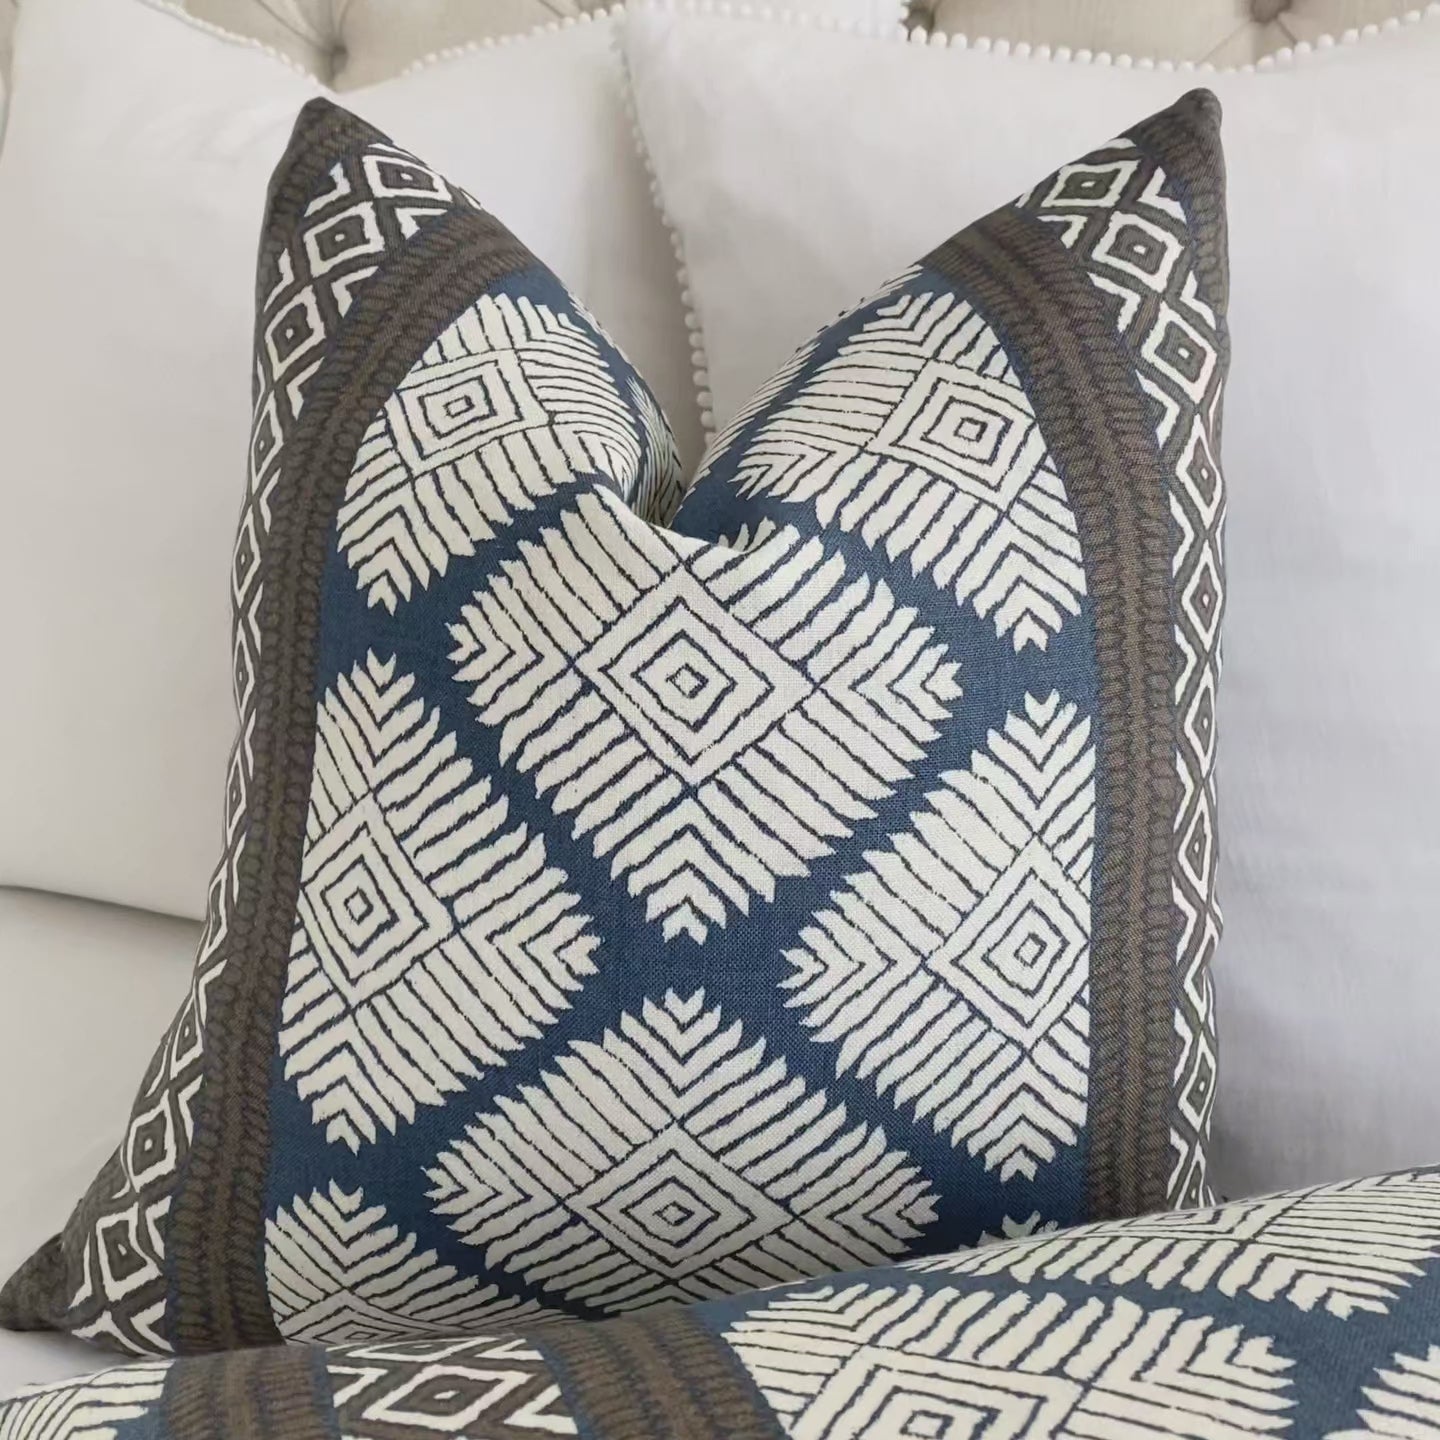 Thibaut Austin Brown and Navy Blue Block Print Designer Luxury Throw Pillow Cover Product Video